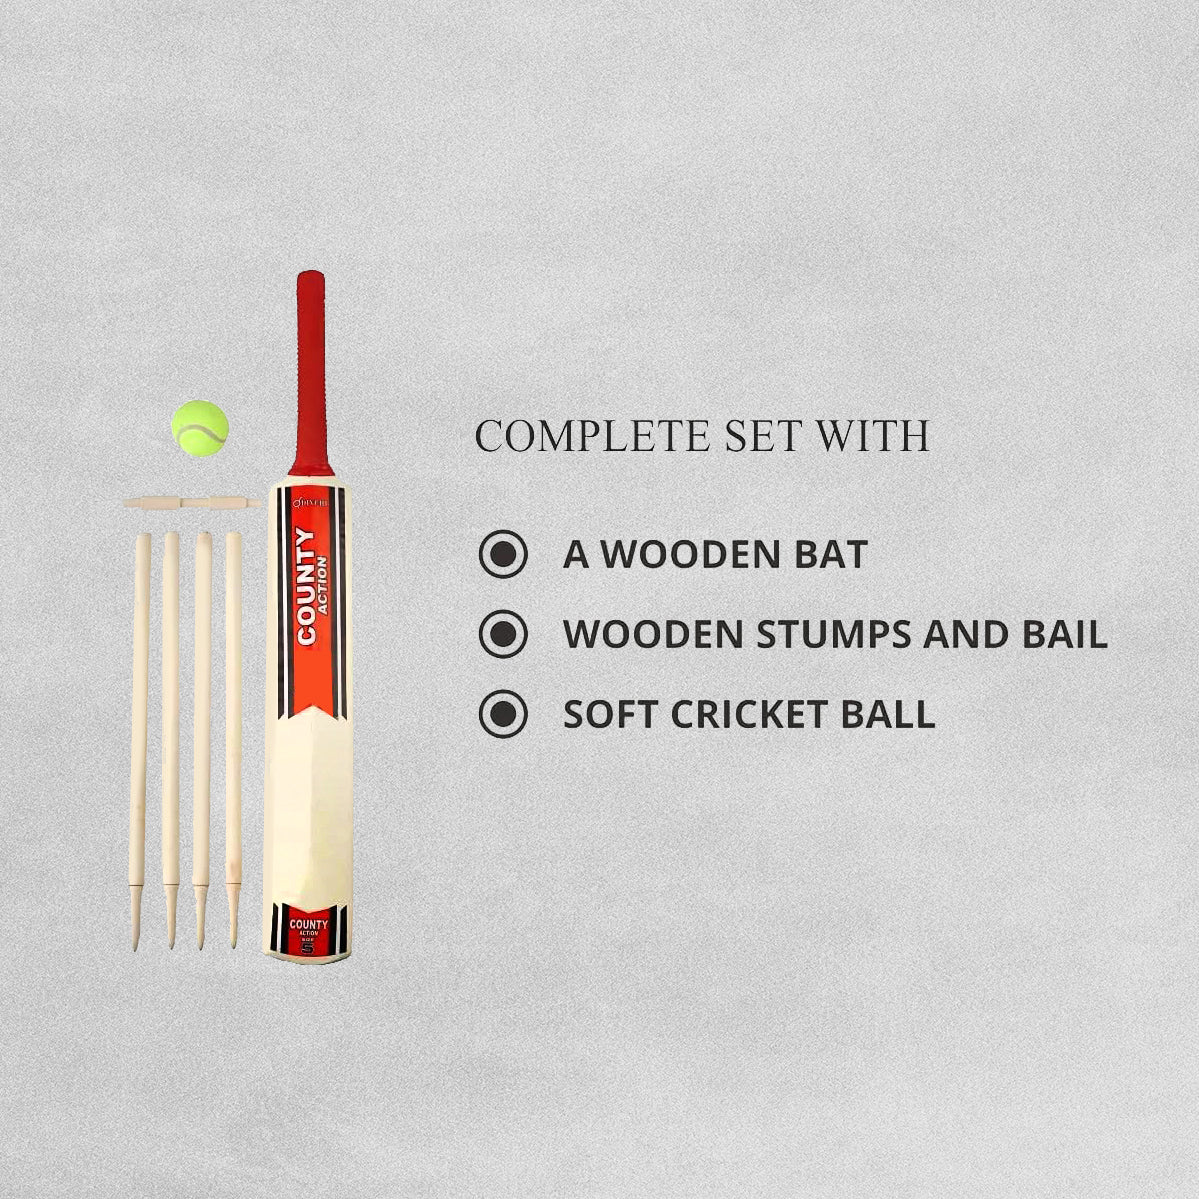 DIVCHI Cricket Set in Mesh Carry Bag - Size 3 for Ages 8-10 Years